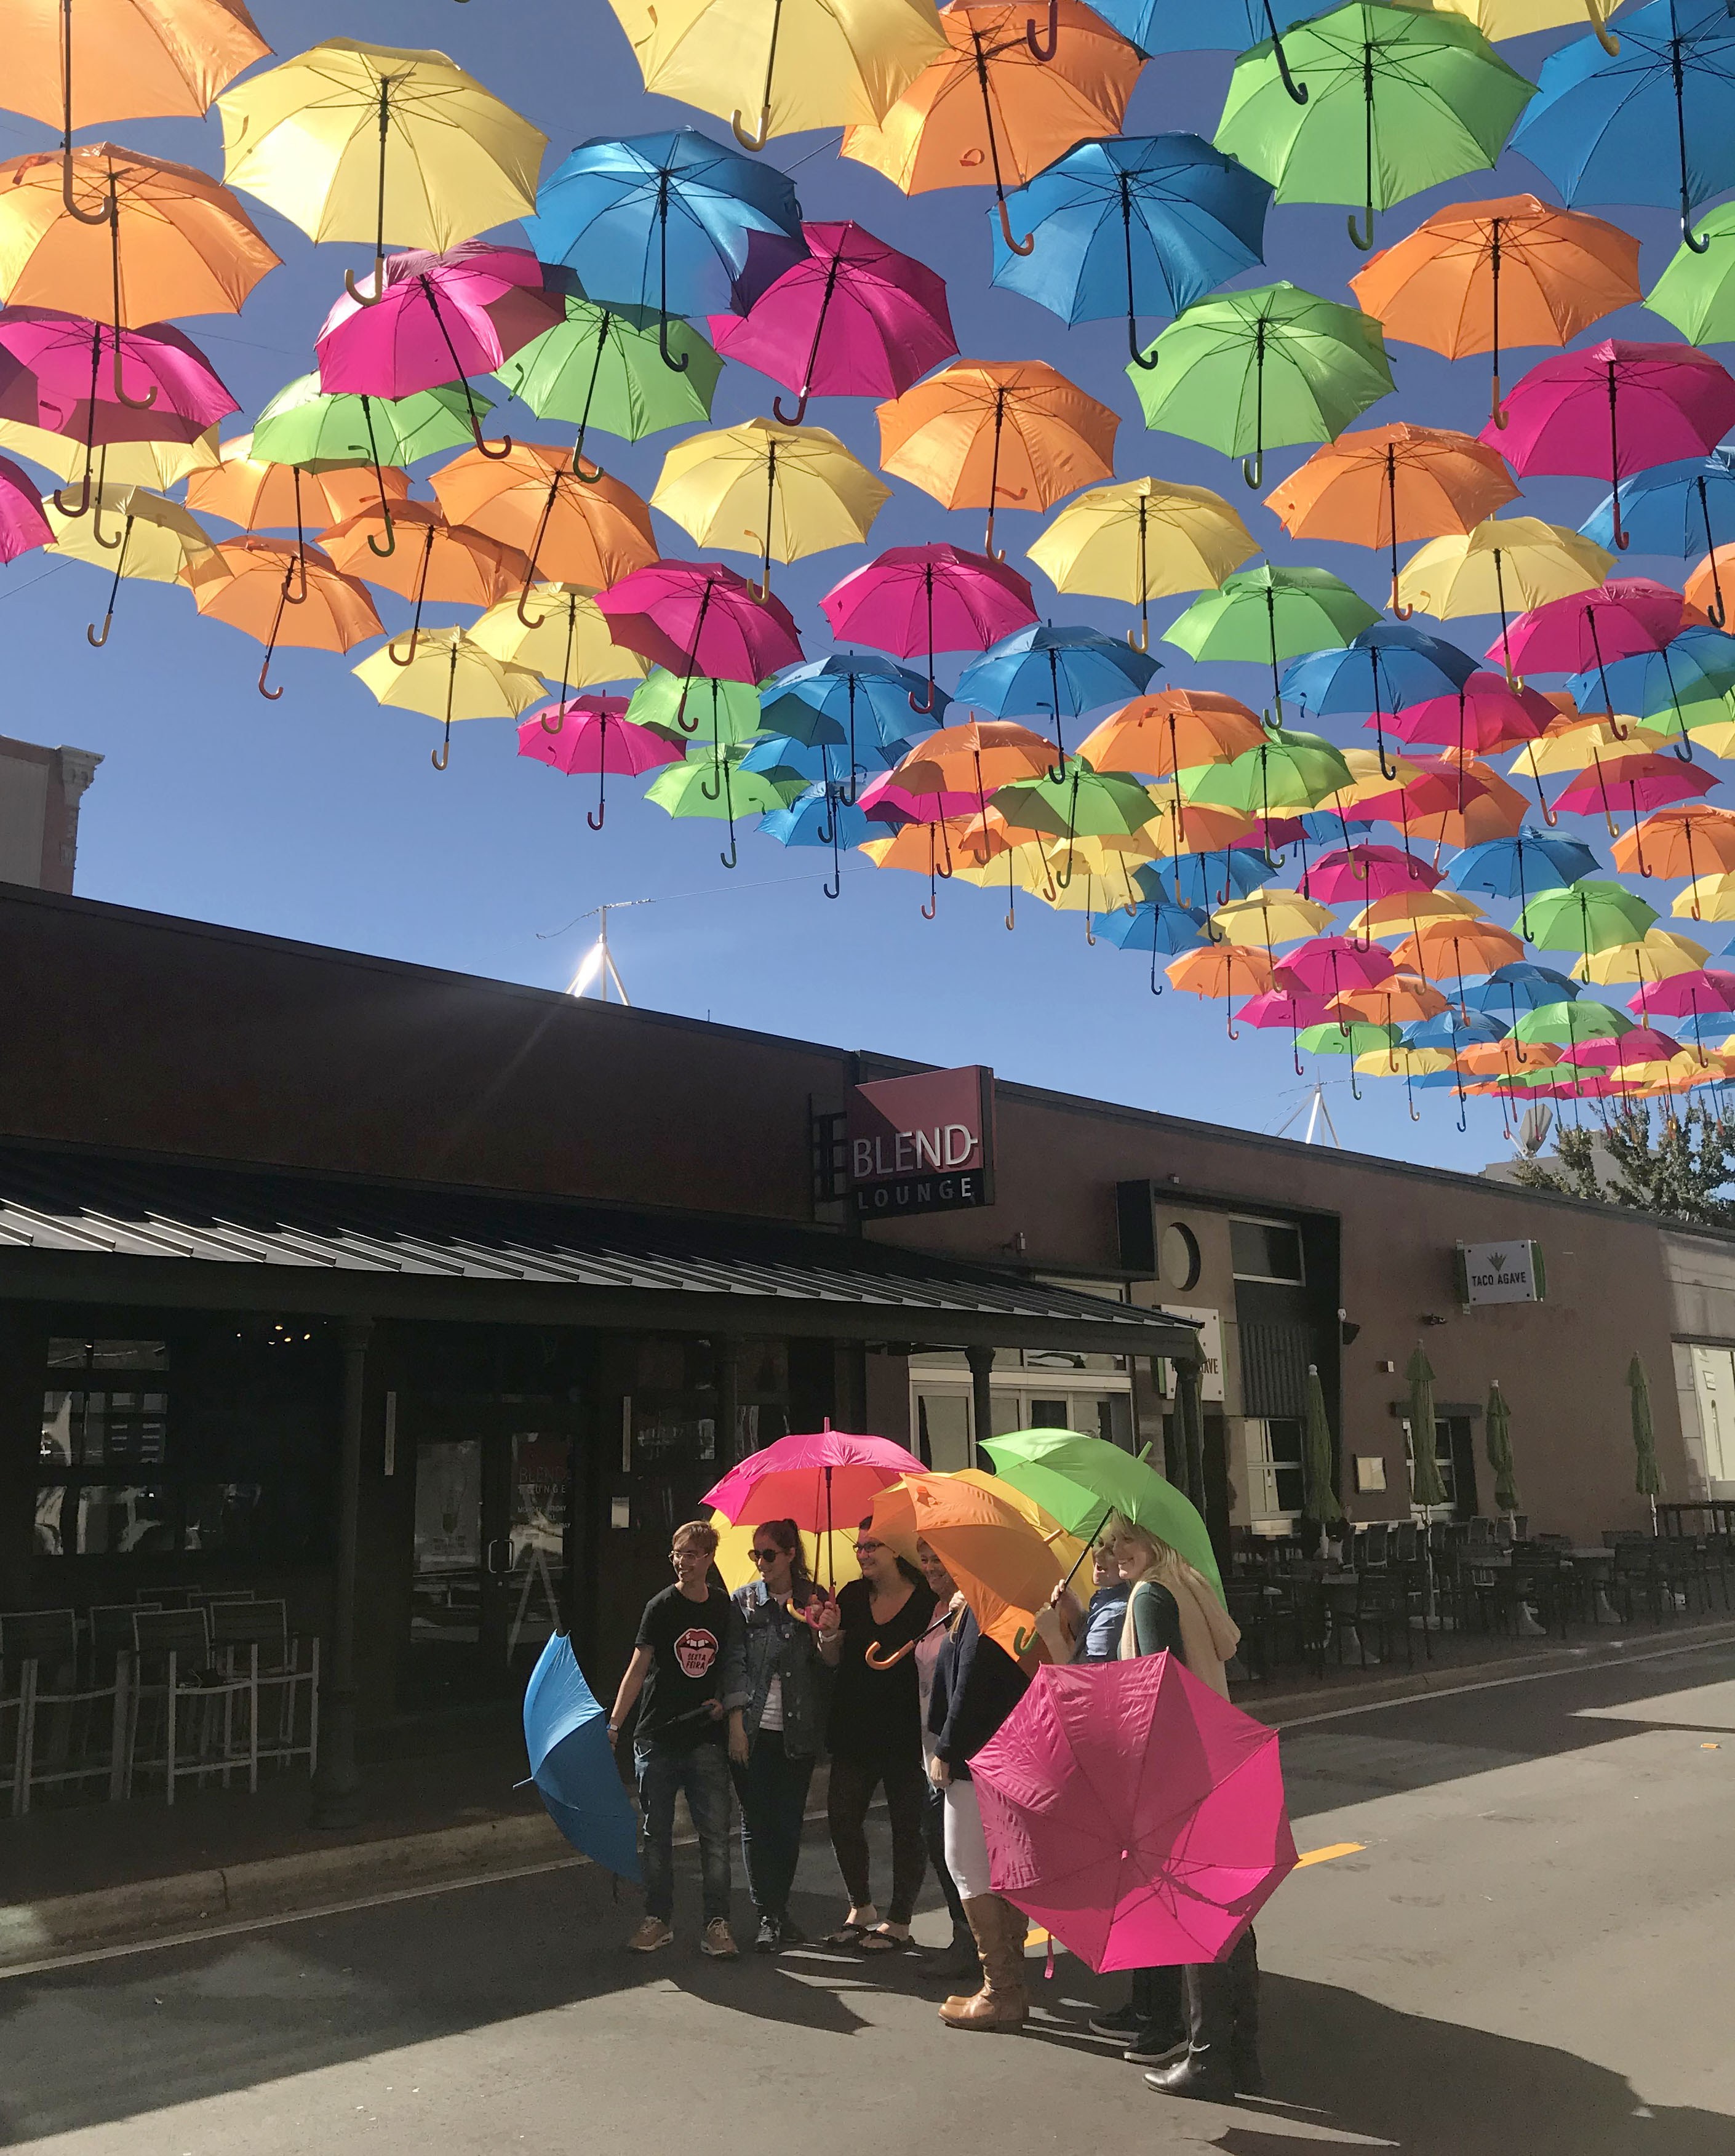 Umbrella Sky project showers downtown Pensacola with color | The Pulse